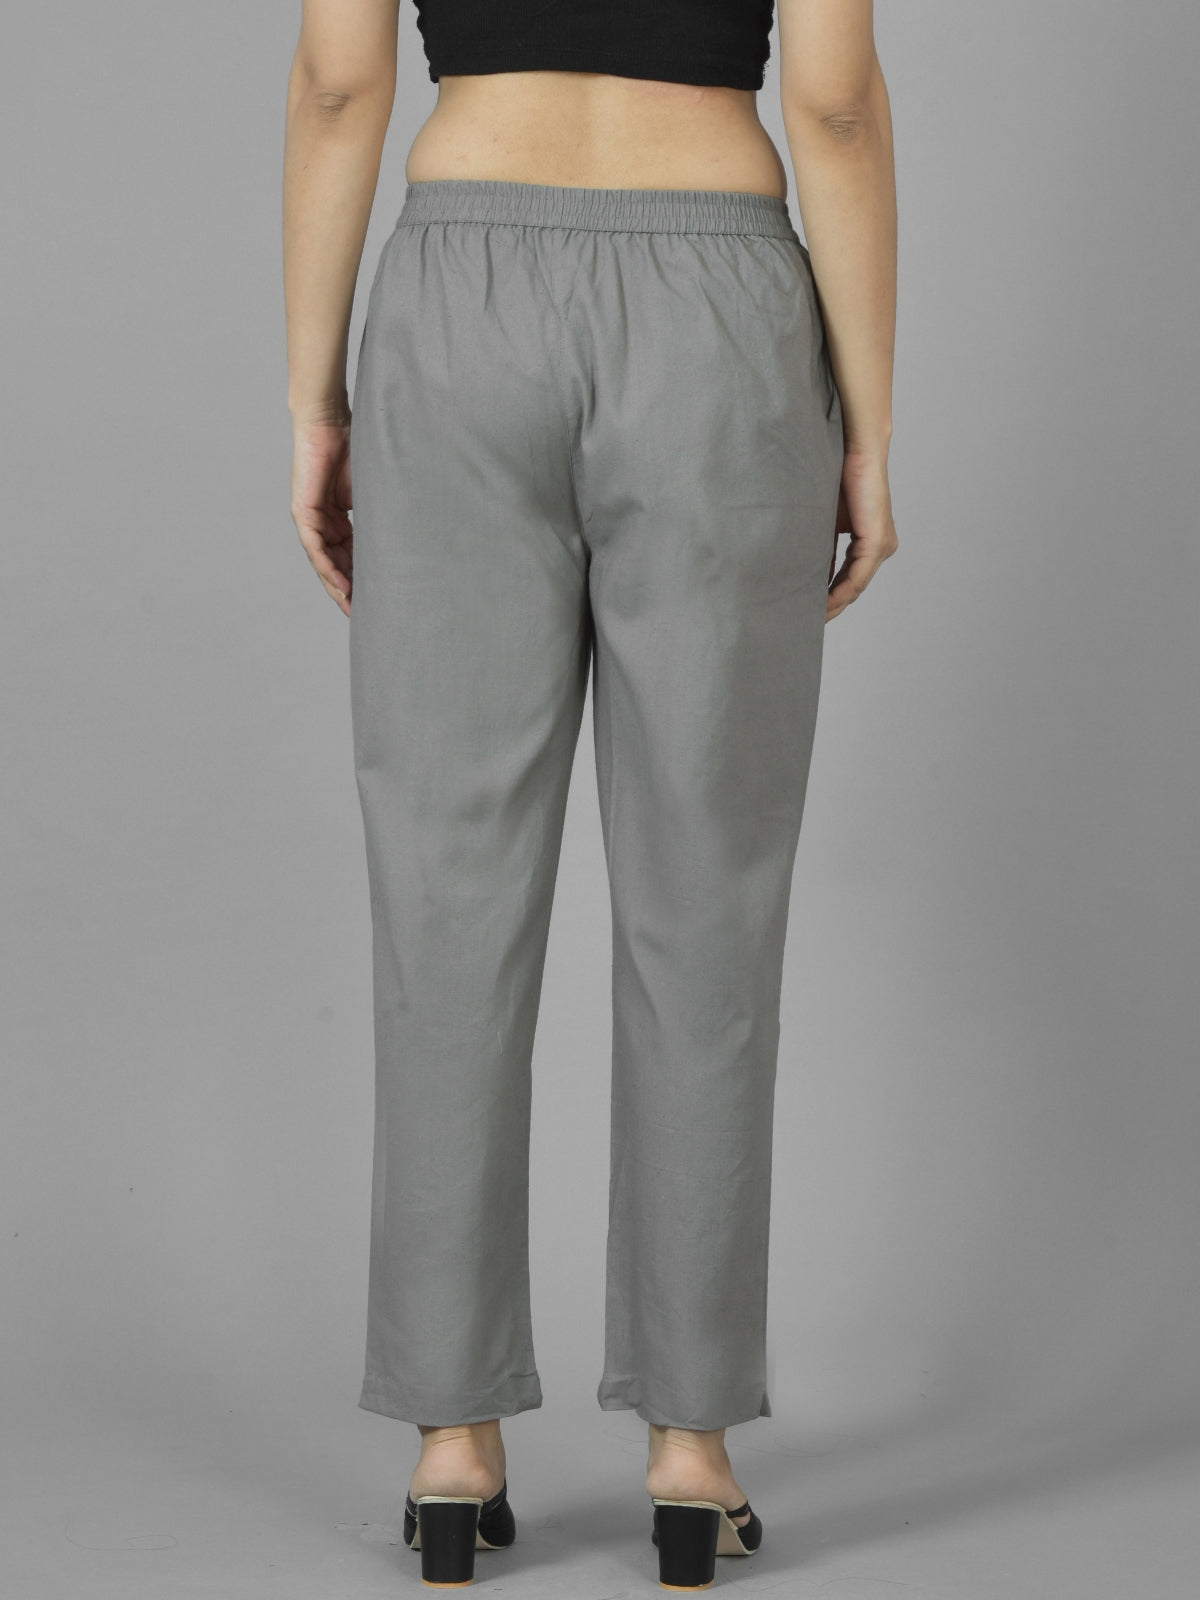 Pack Of 2 Womens Grey And Melange Grey Deep Pocket Fully Elastic Cotton Trouser